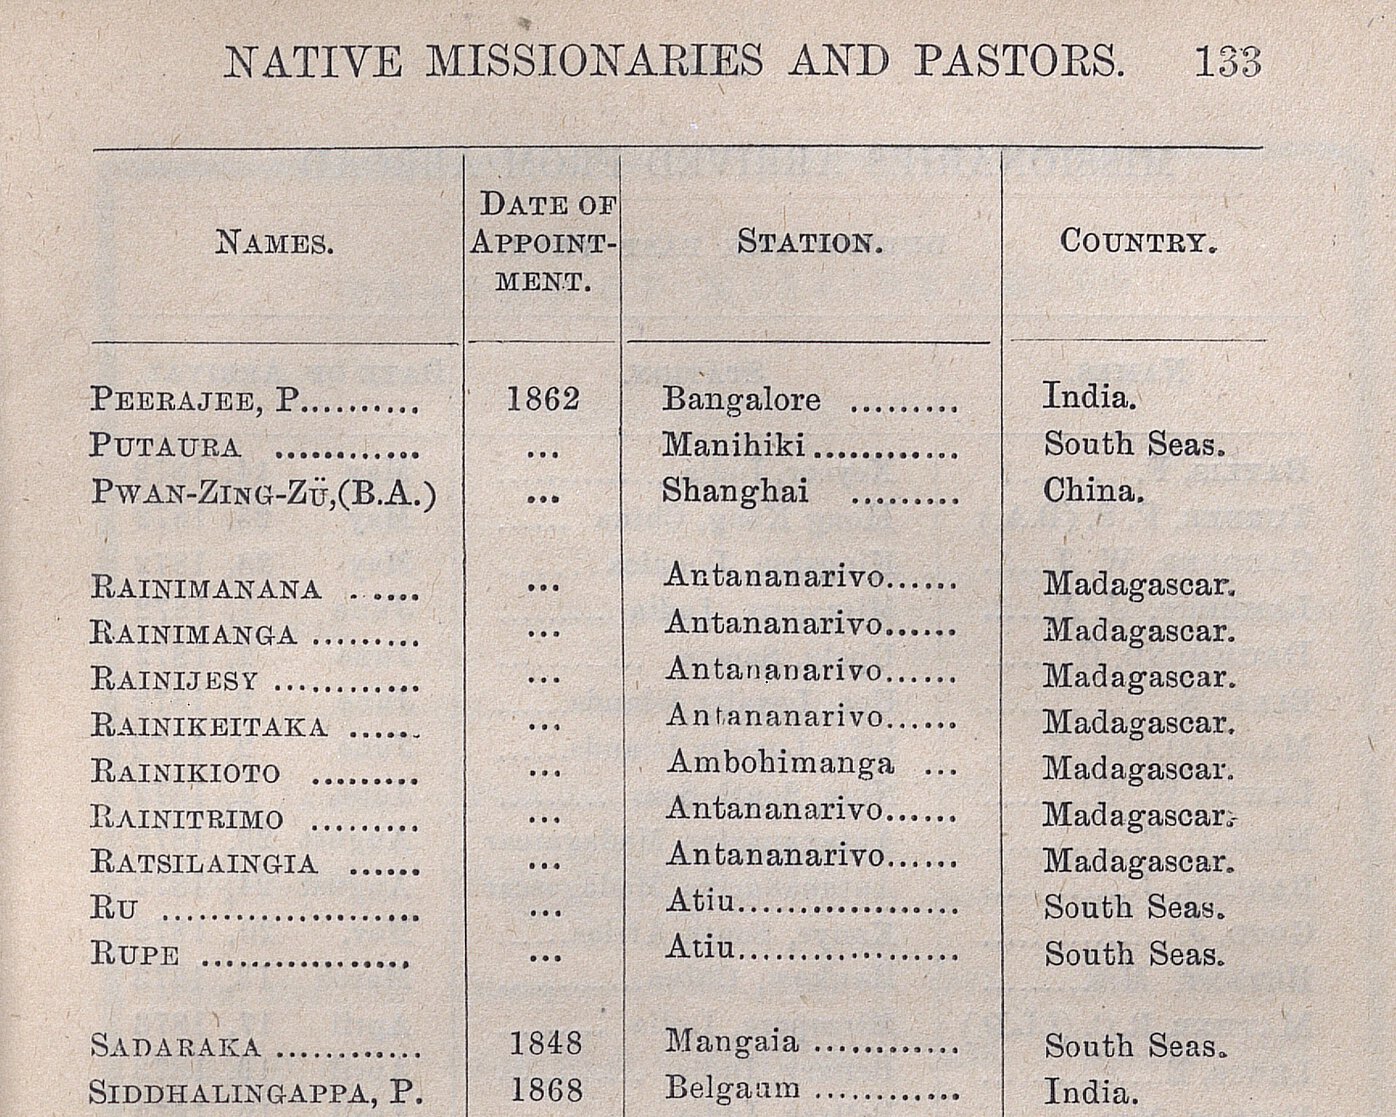 Table of “Native Missionaries and Pastors” with names, dates of appointment, station, and country.